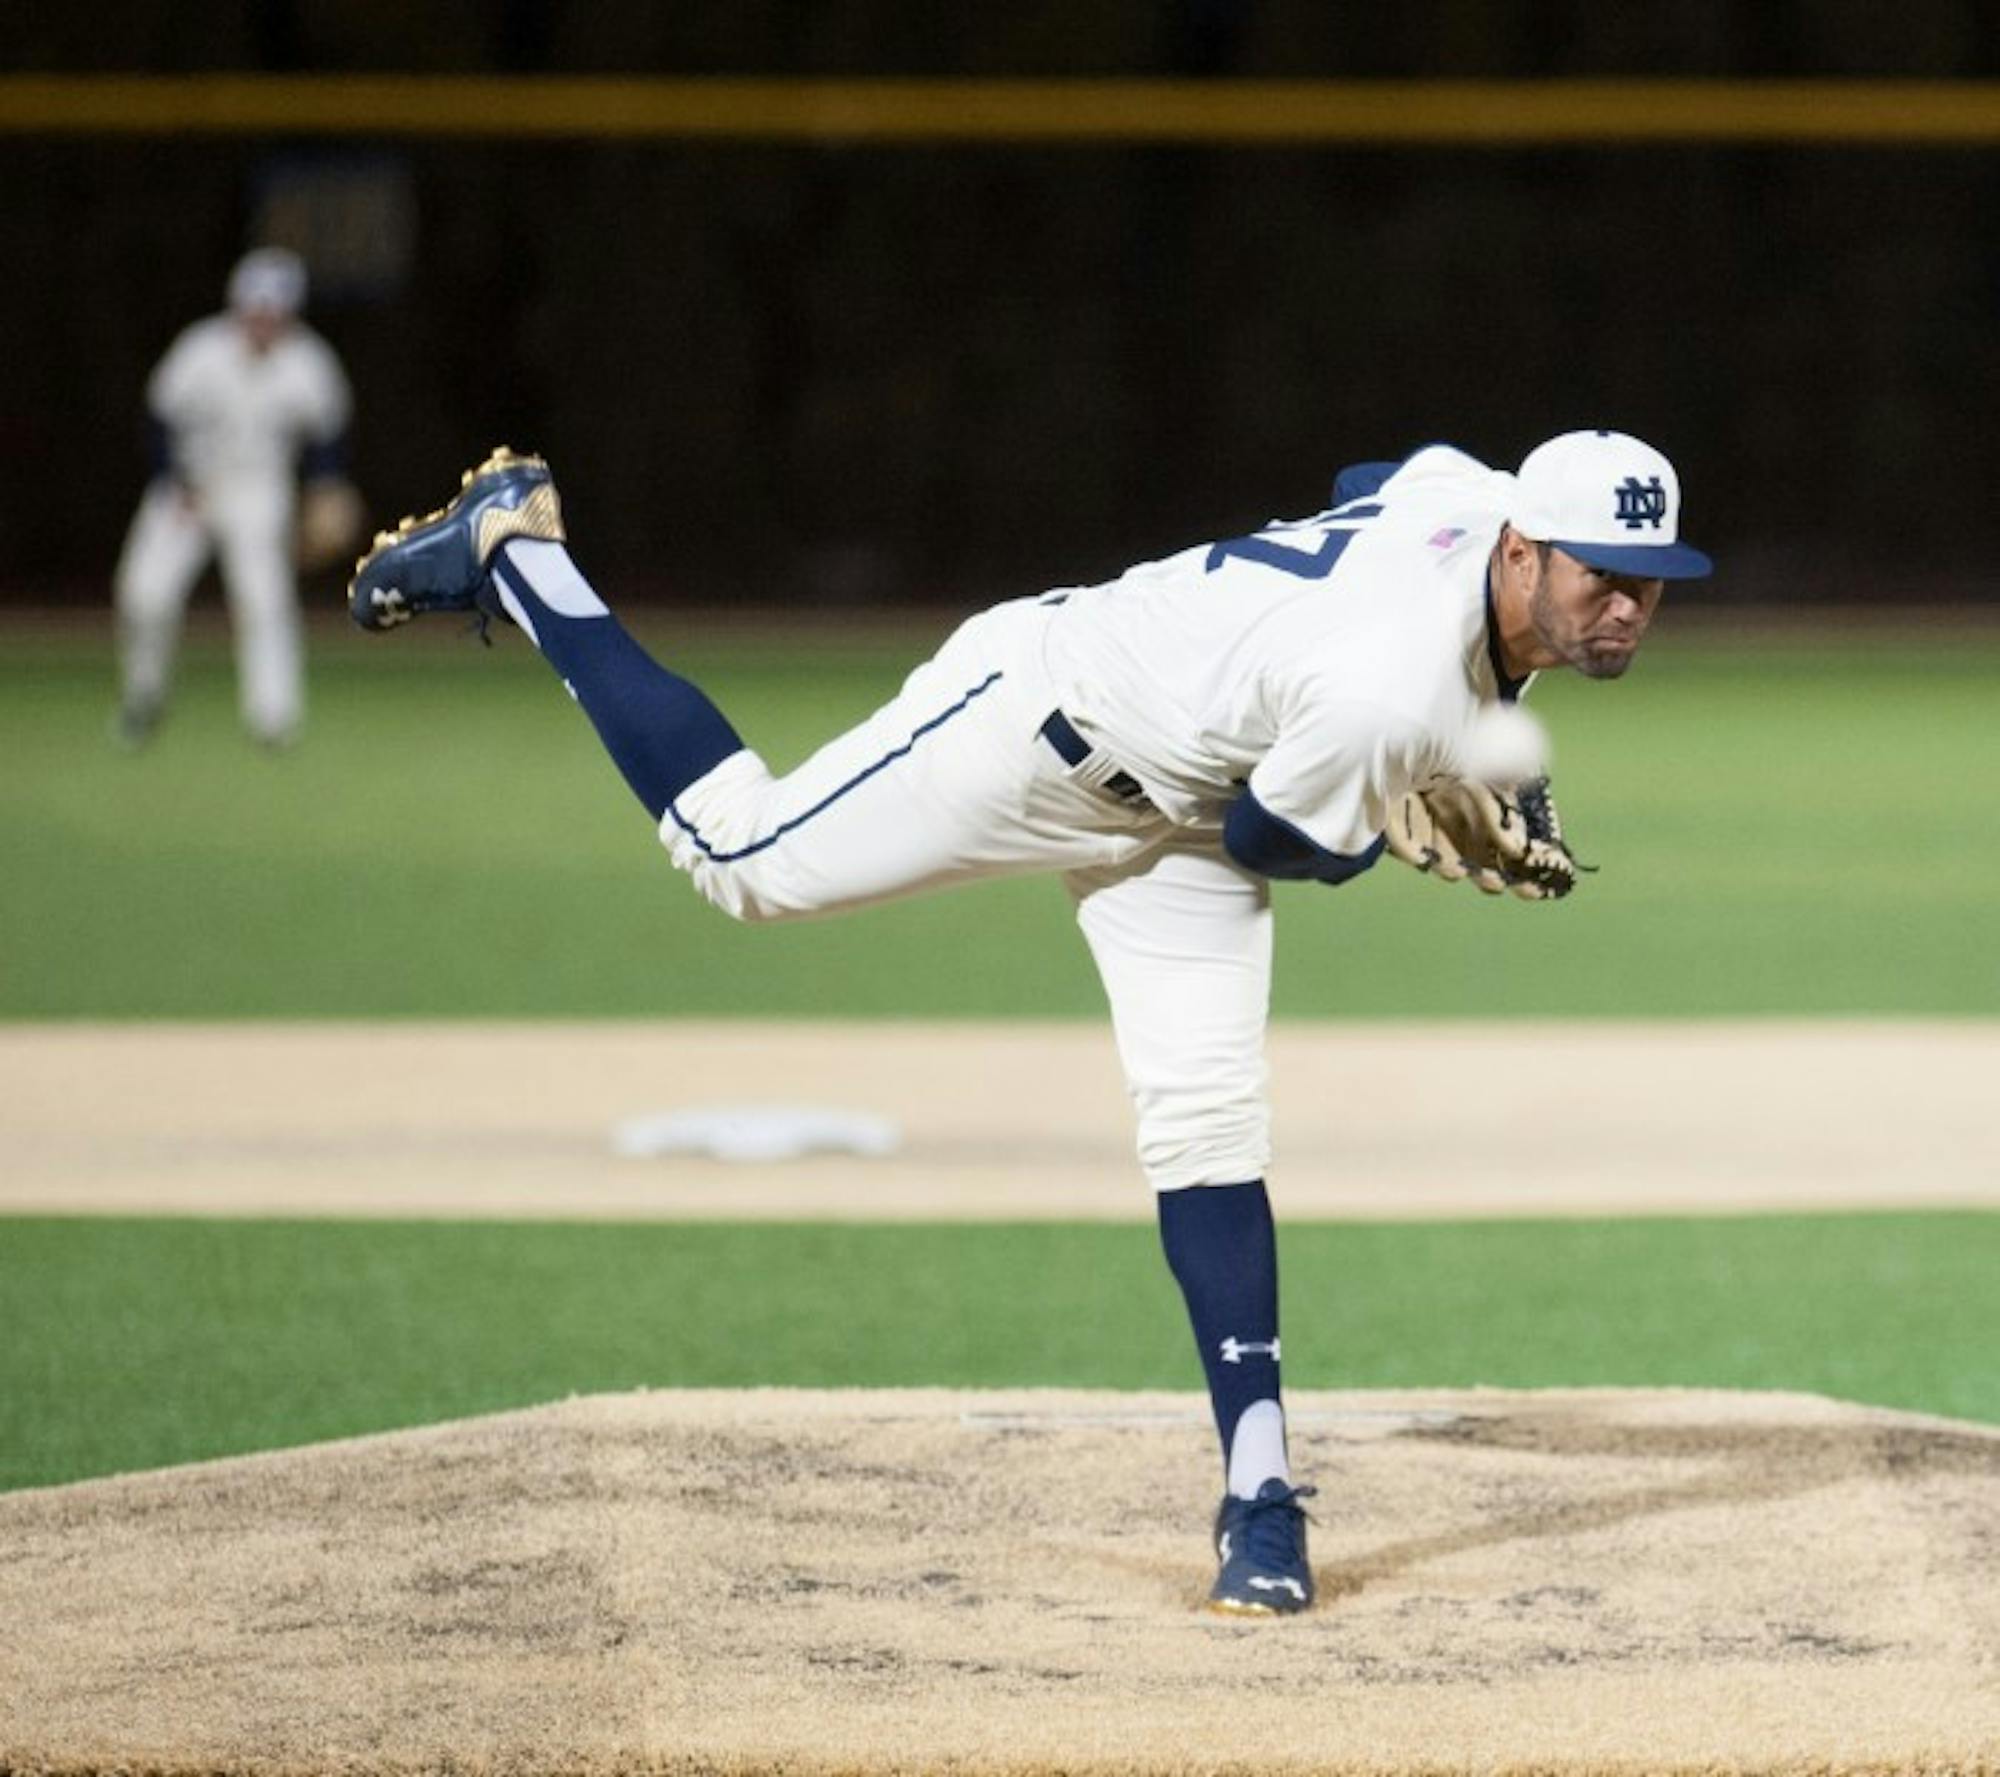 Irish right-hander Cristian Torres delivers a pitch during Notre Dame’s 8-3 win over Central Michigan on March 18 at Frank Eck Stadium.